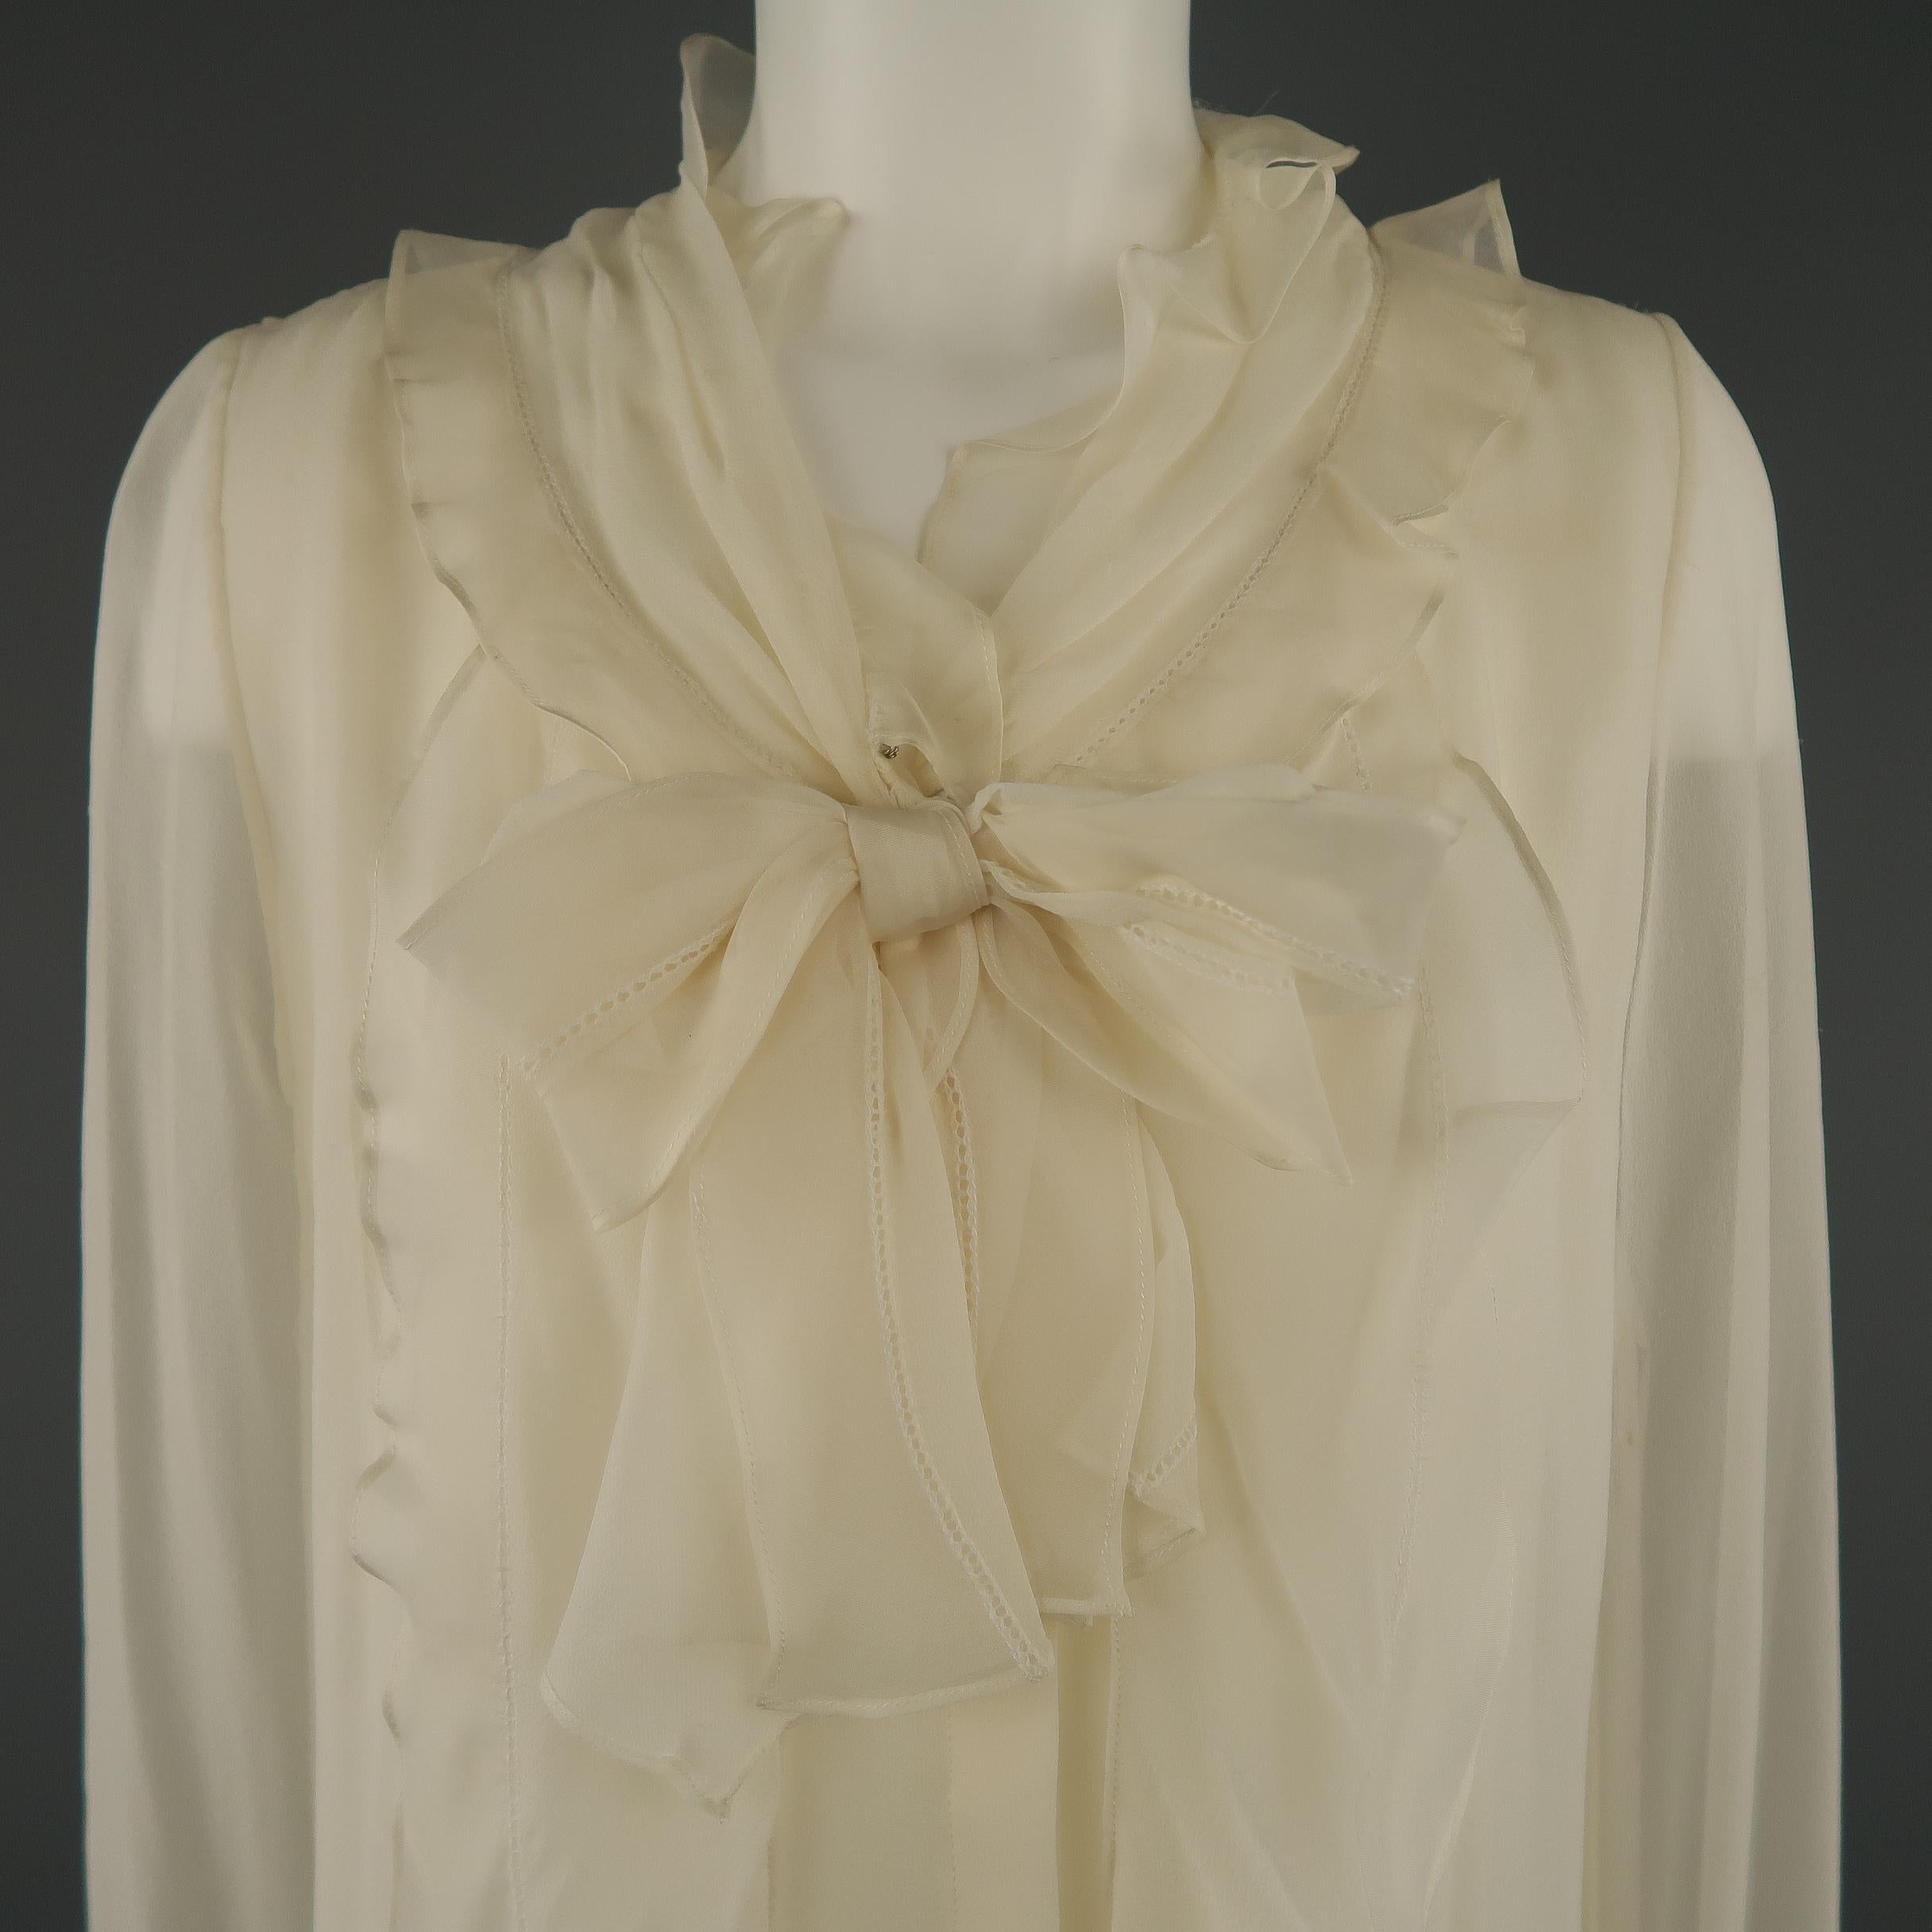 OSCAR DE LA RENTA blouse comes in cream silk chiffon with a round ruffled collar, bow accent, and hidden placket closure. Imperfections in material on sleeves and stain on back. As-is. With tags. Made in USA.
 
Good Pre-Owned Condition.
Marked: 8
